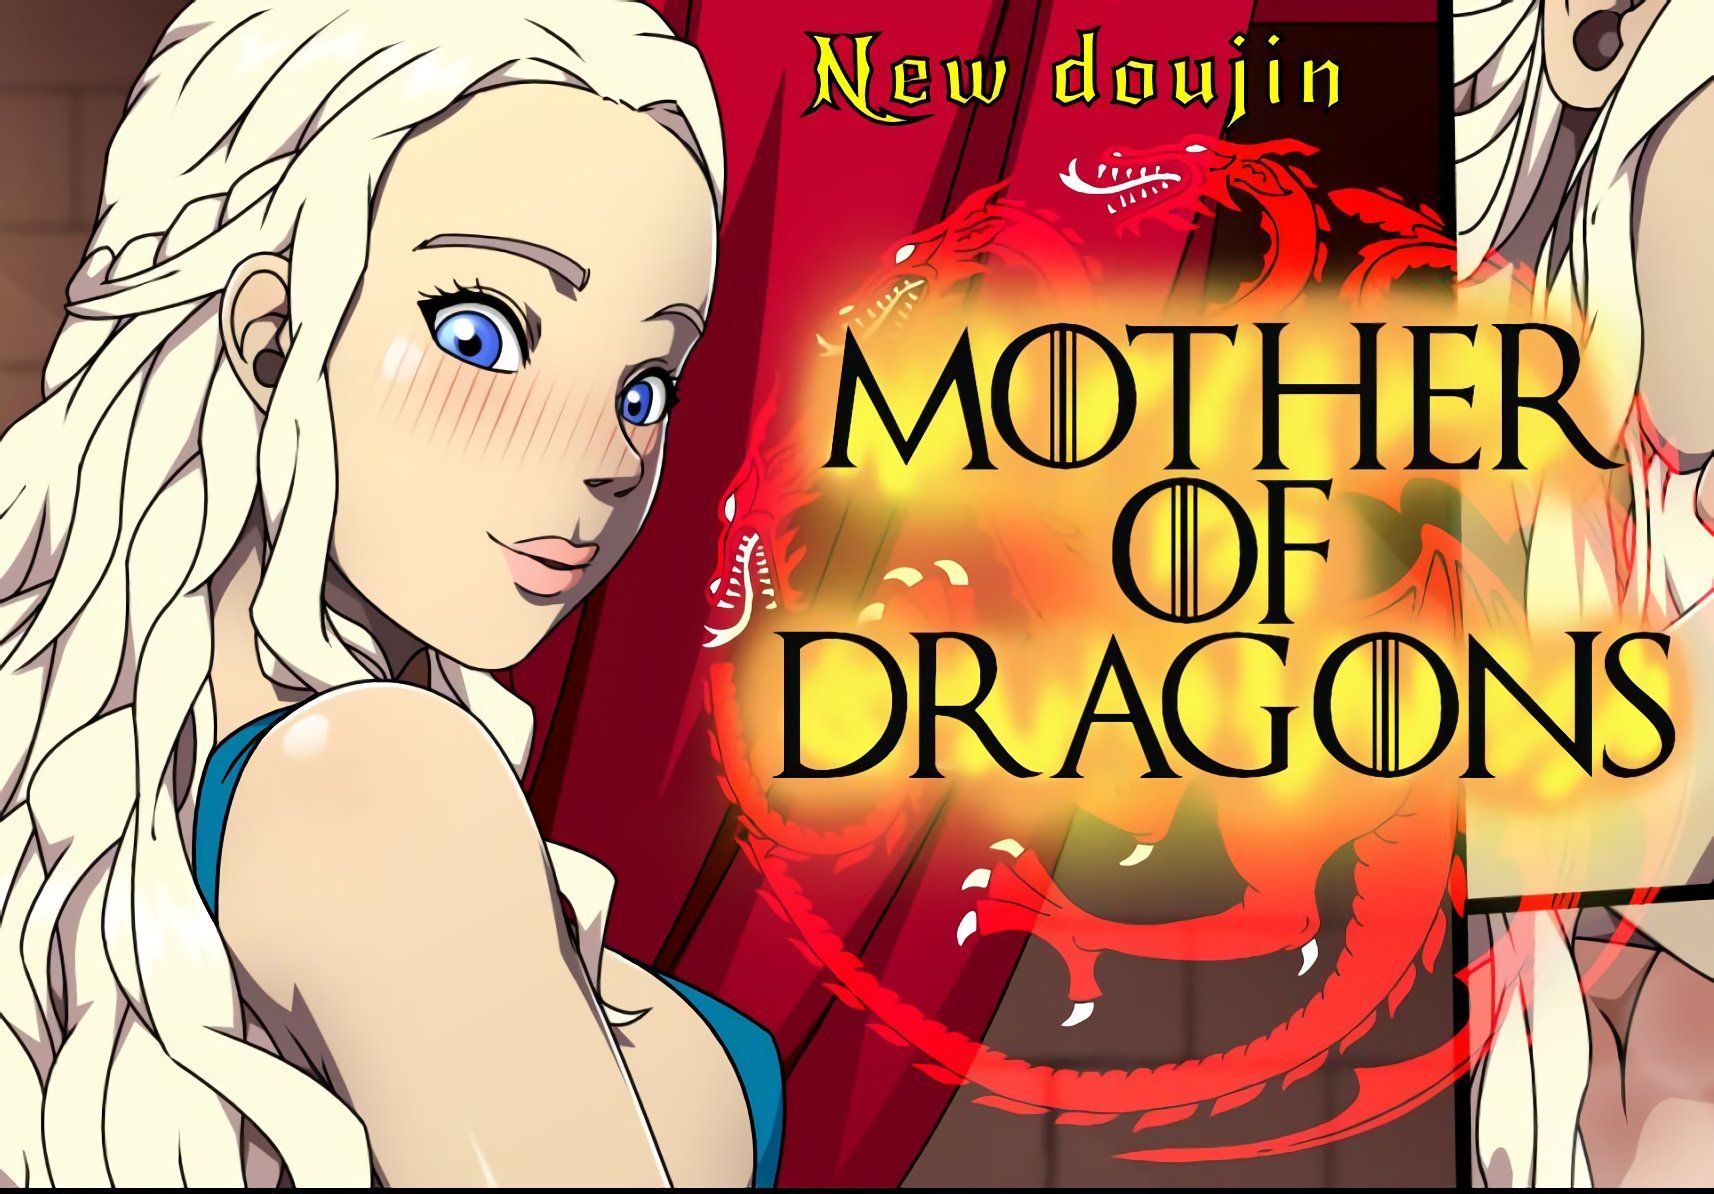 Mother dragons